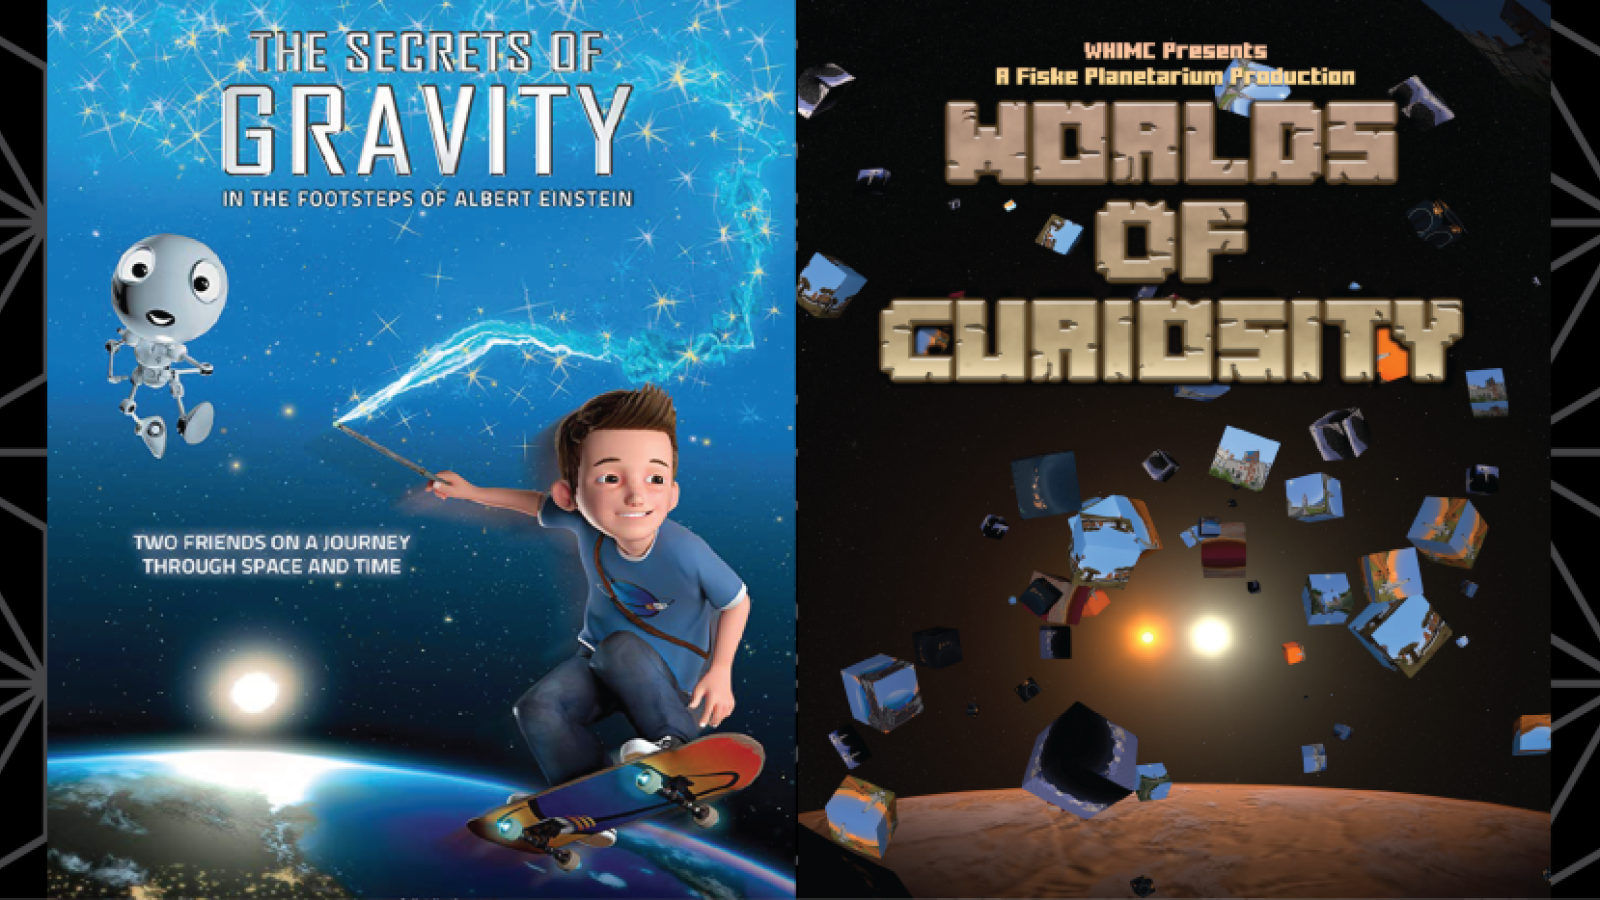 Posters of both films with main character on a skateboard and robot friend plus worlds of curiosity with a mars scene and minecraft boxes hovering in space